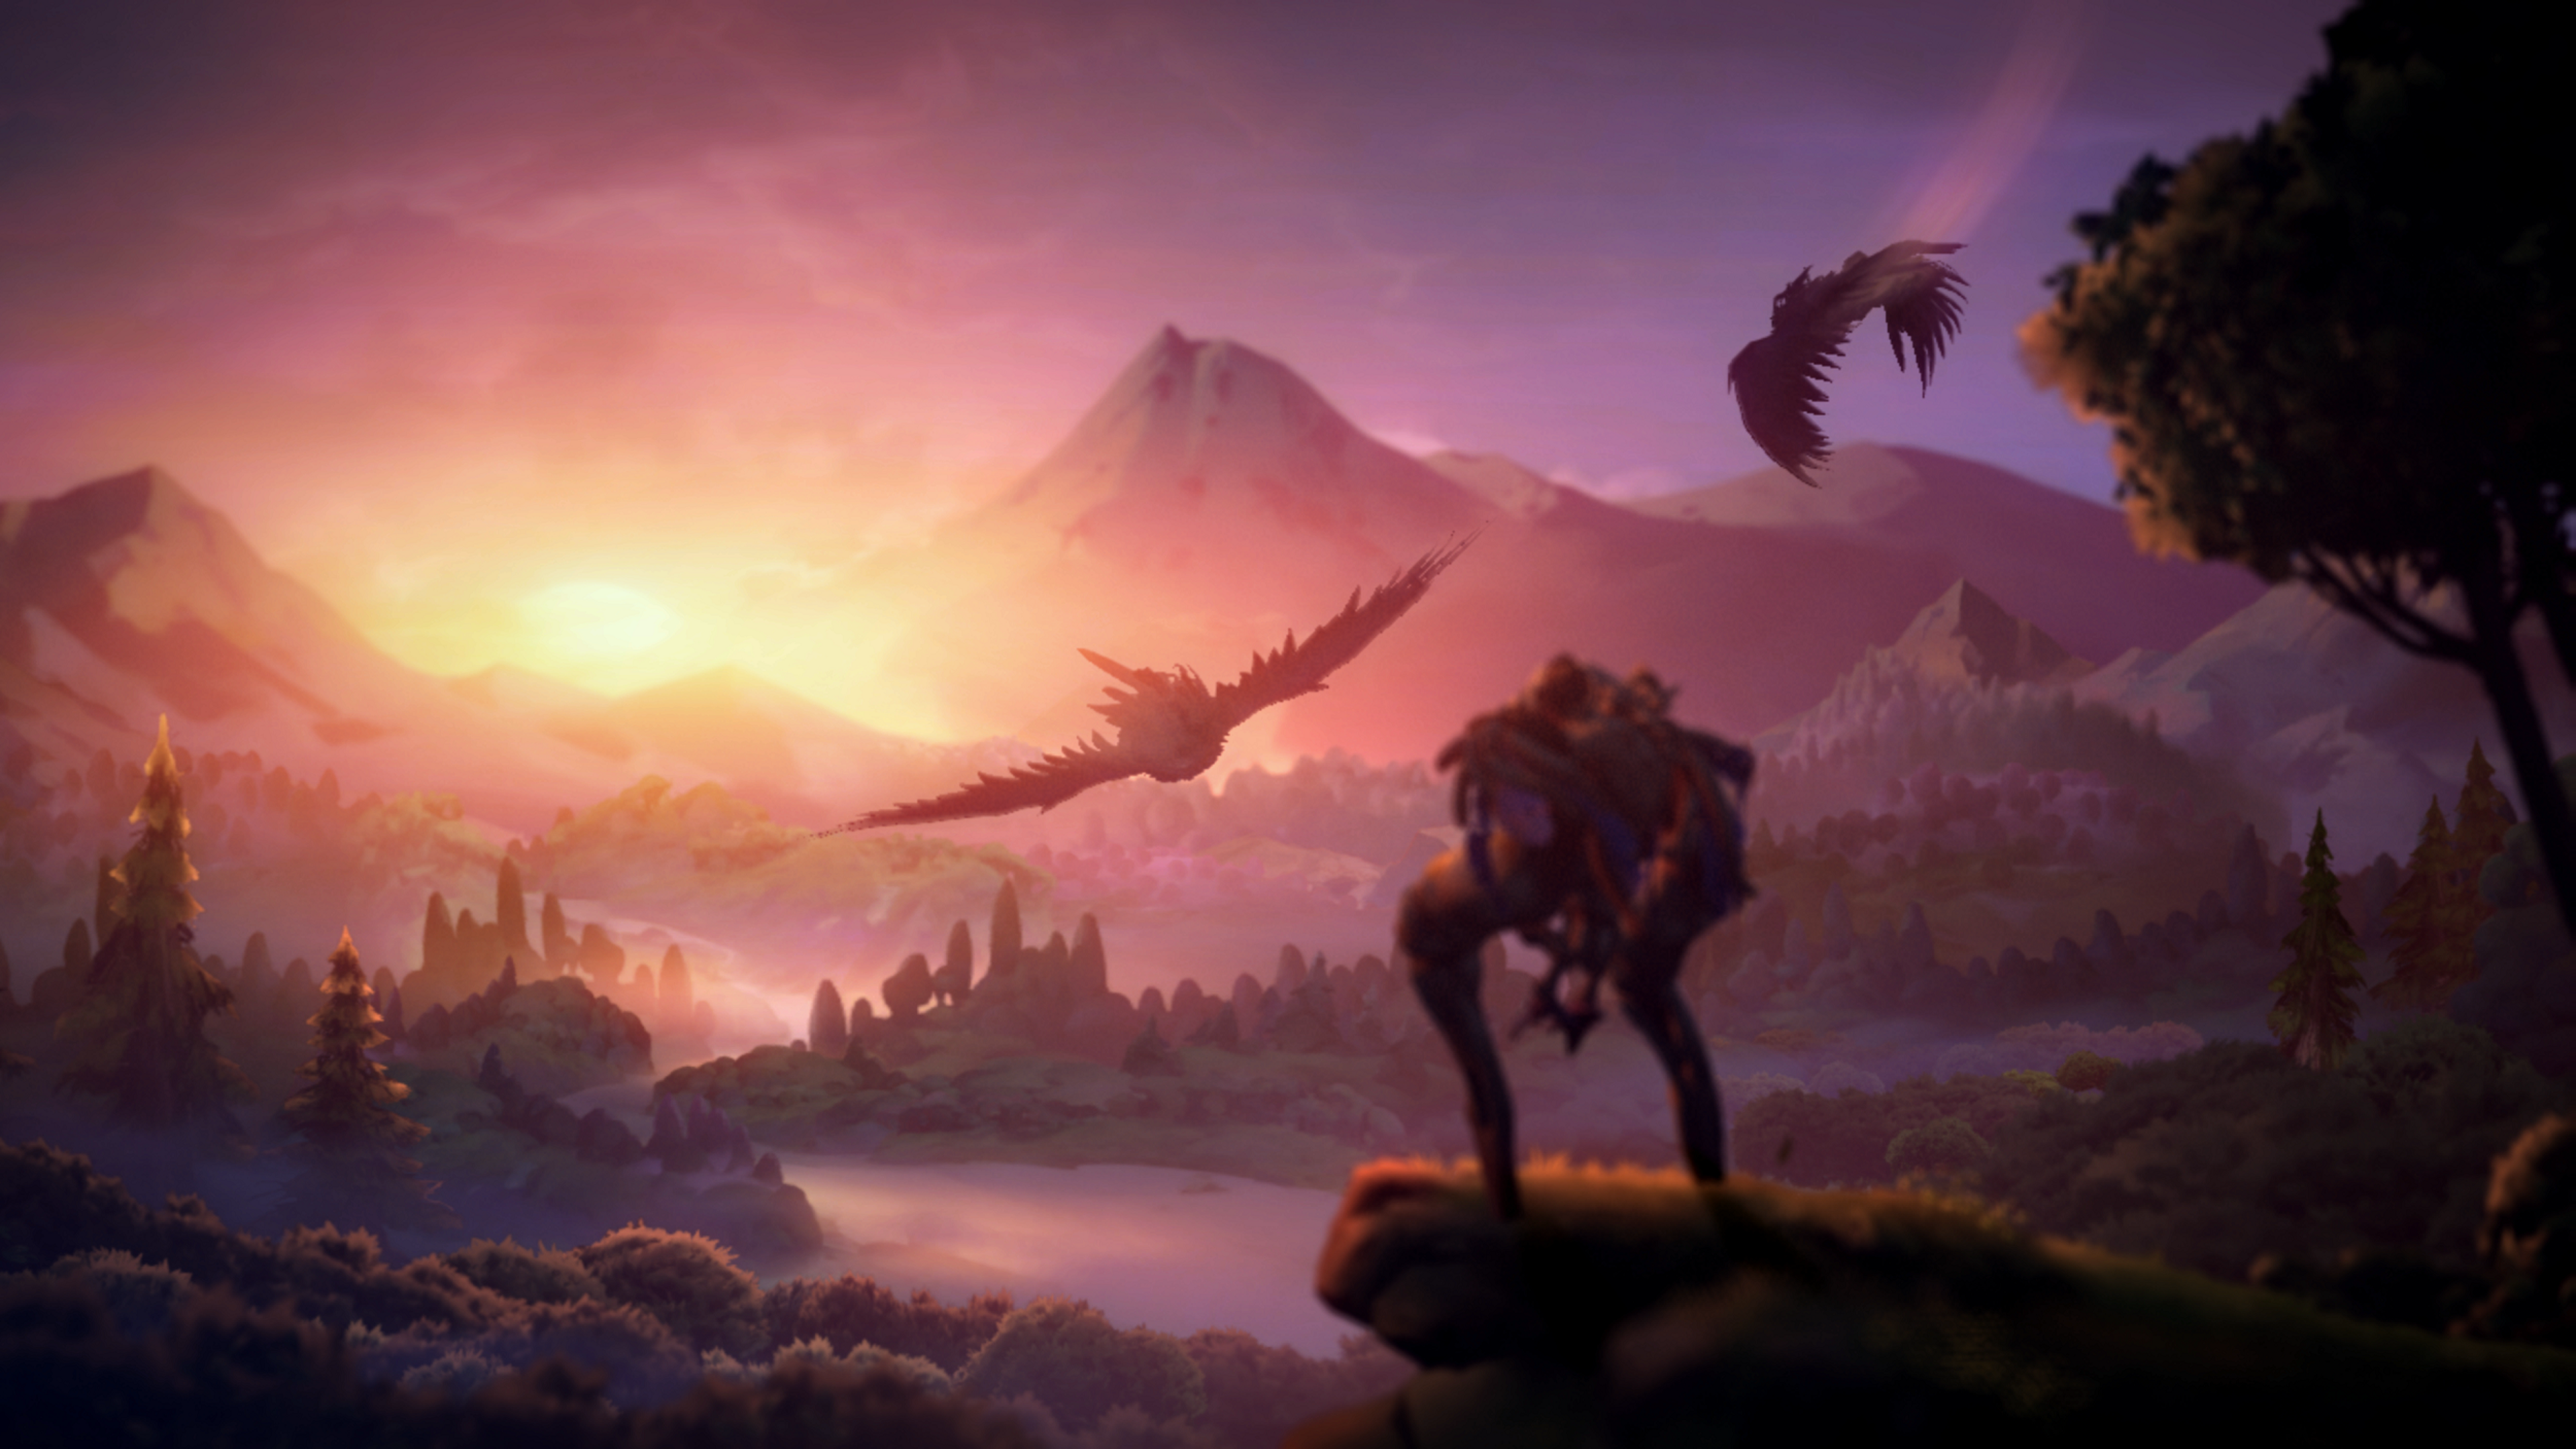 Análisis de Ori and the Will of the Wisps para Xbox One y Windows 10